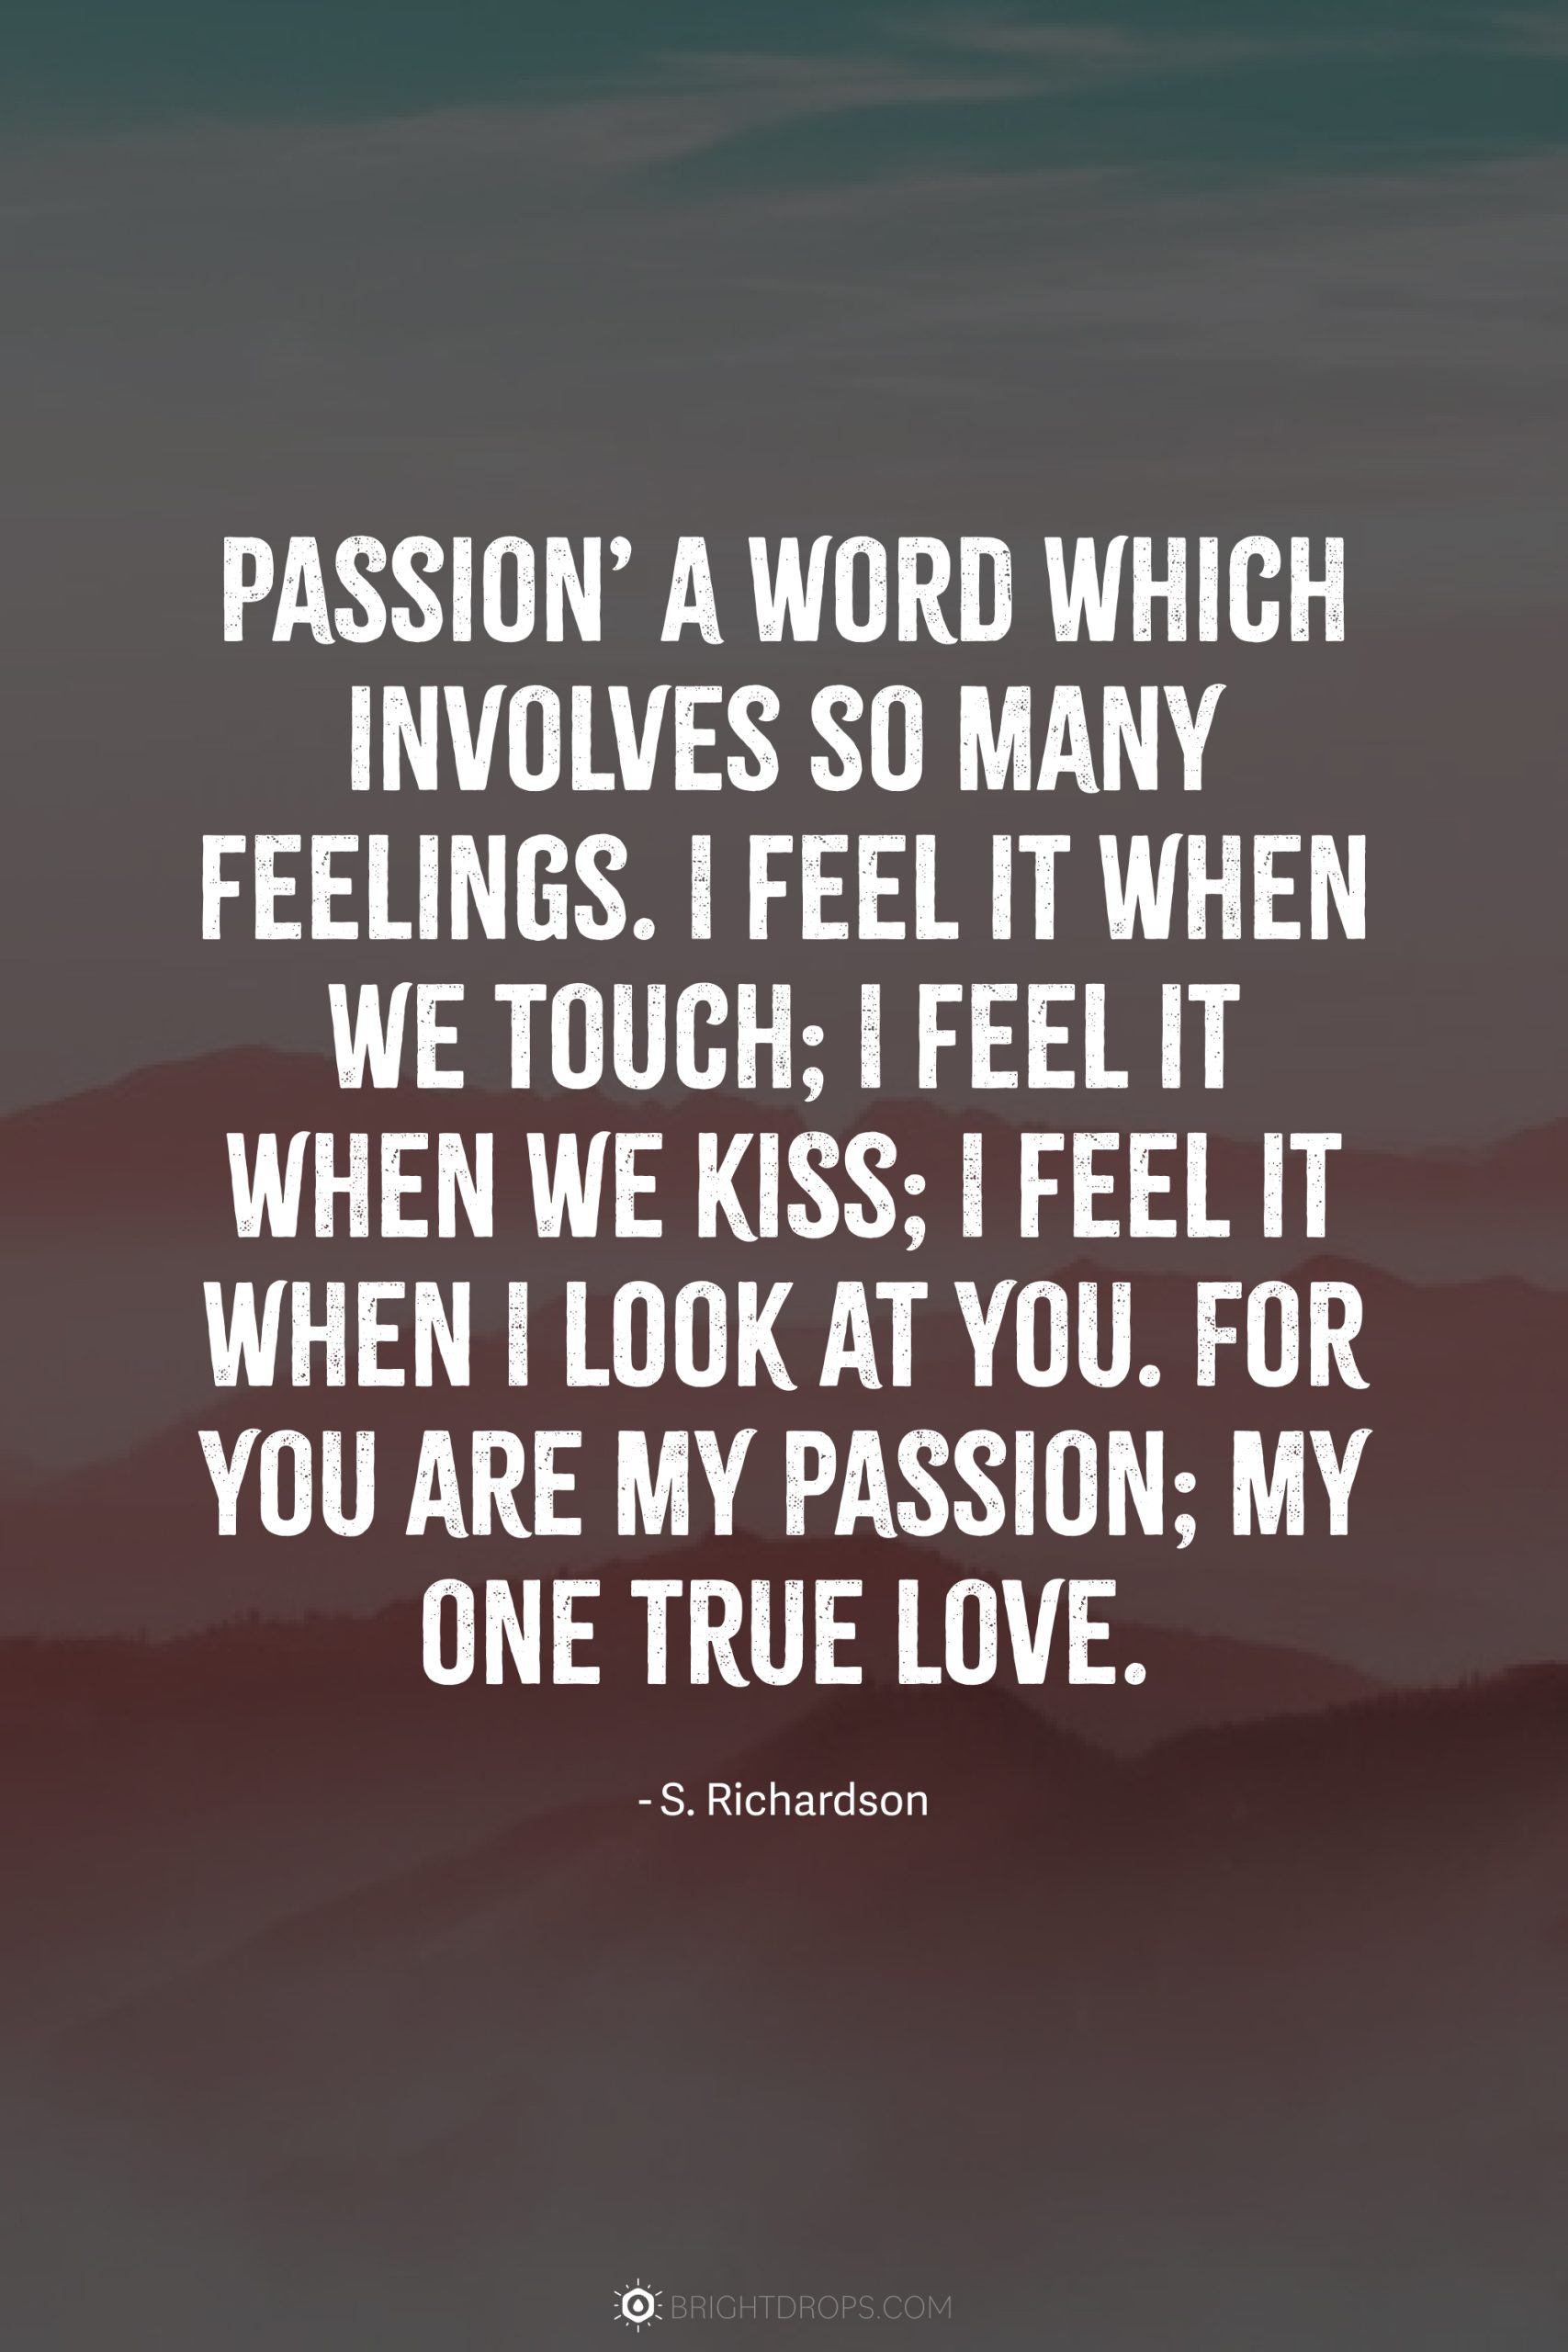 Passion’ a word which involves so many feelings. I feel it when we touch; I feel it when we kiss; I feel it when I look at you. For you are my passion; my one true love.